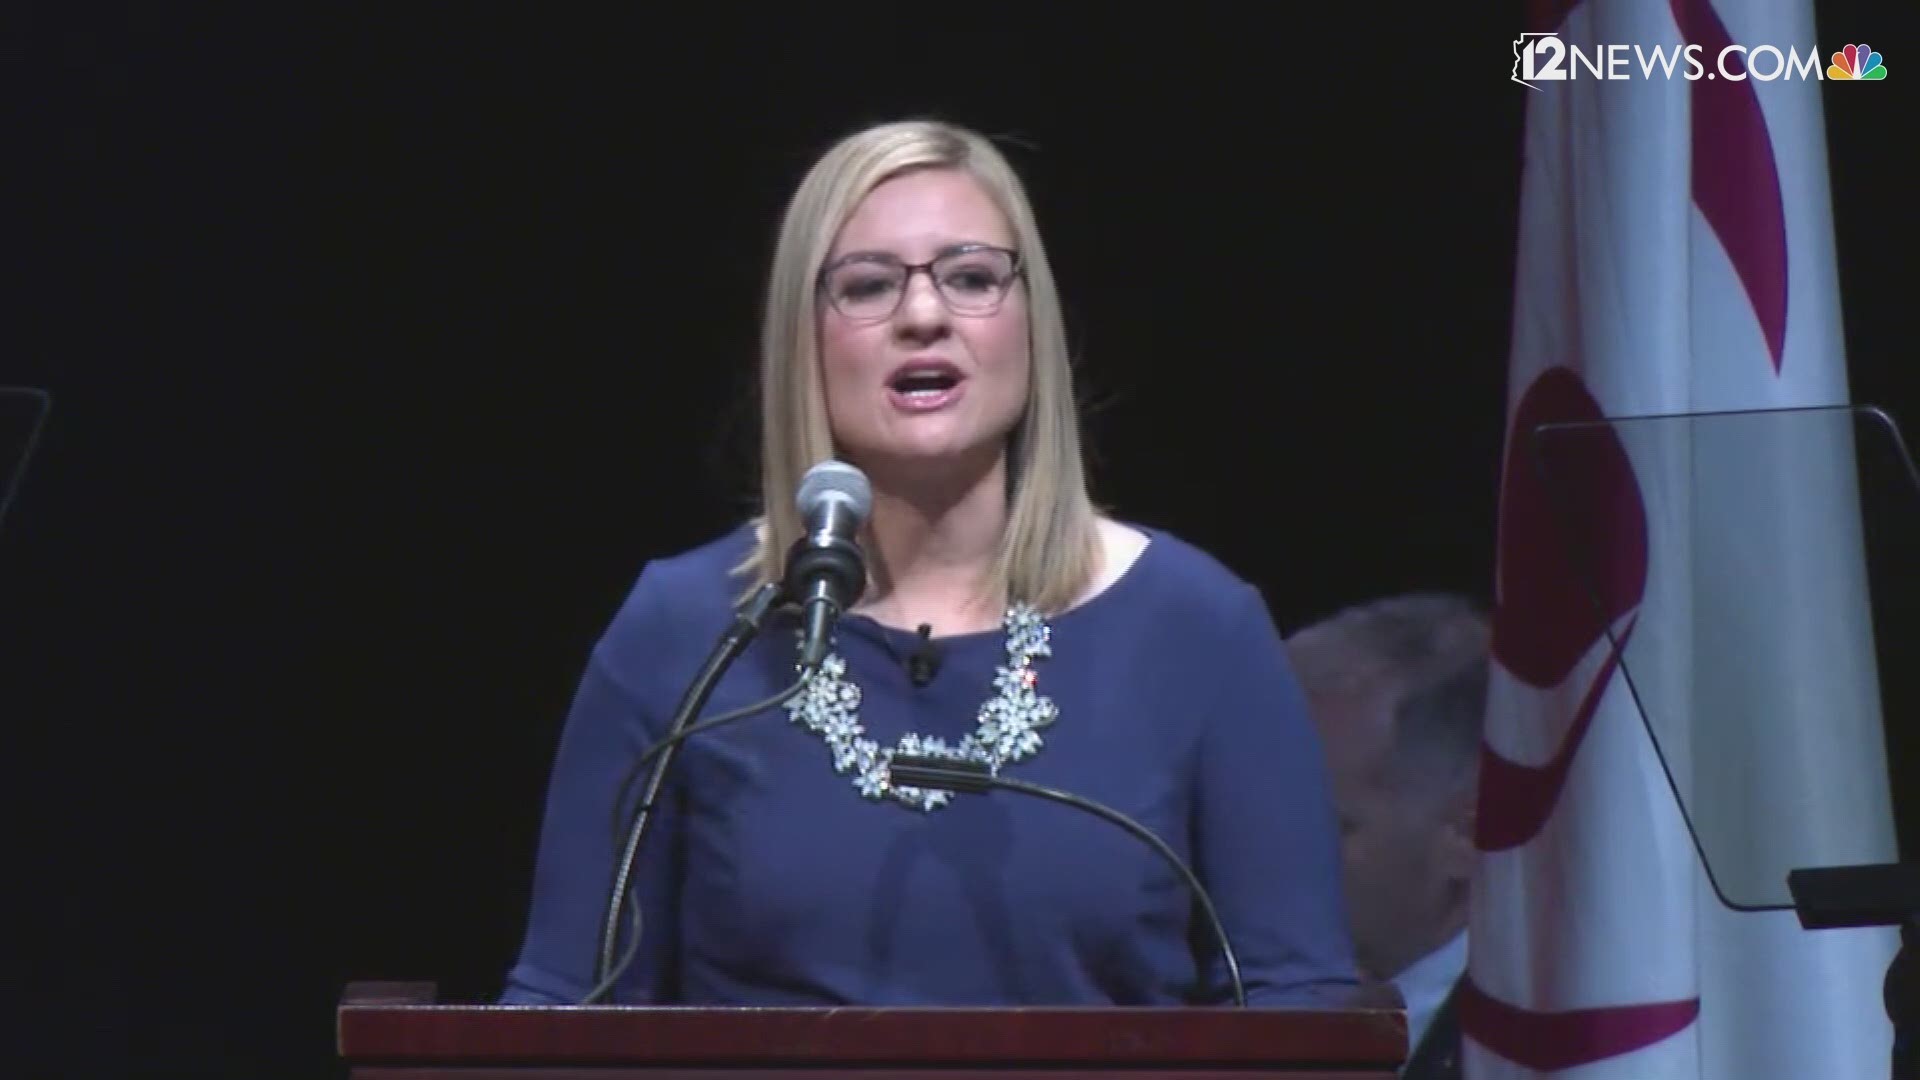 Kate Gallego was sworn in as the next mayor of Phoenix Thursday. During her speech, she took a moment to honor the sacrifice of fallen Phoenix police Officer Paul Rutherford for the city.